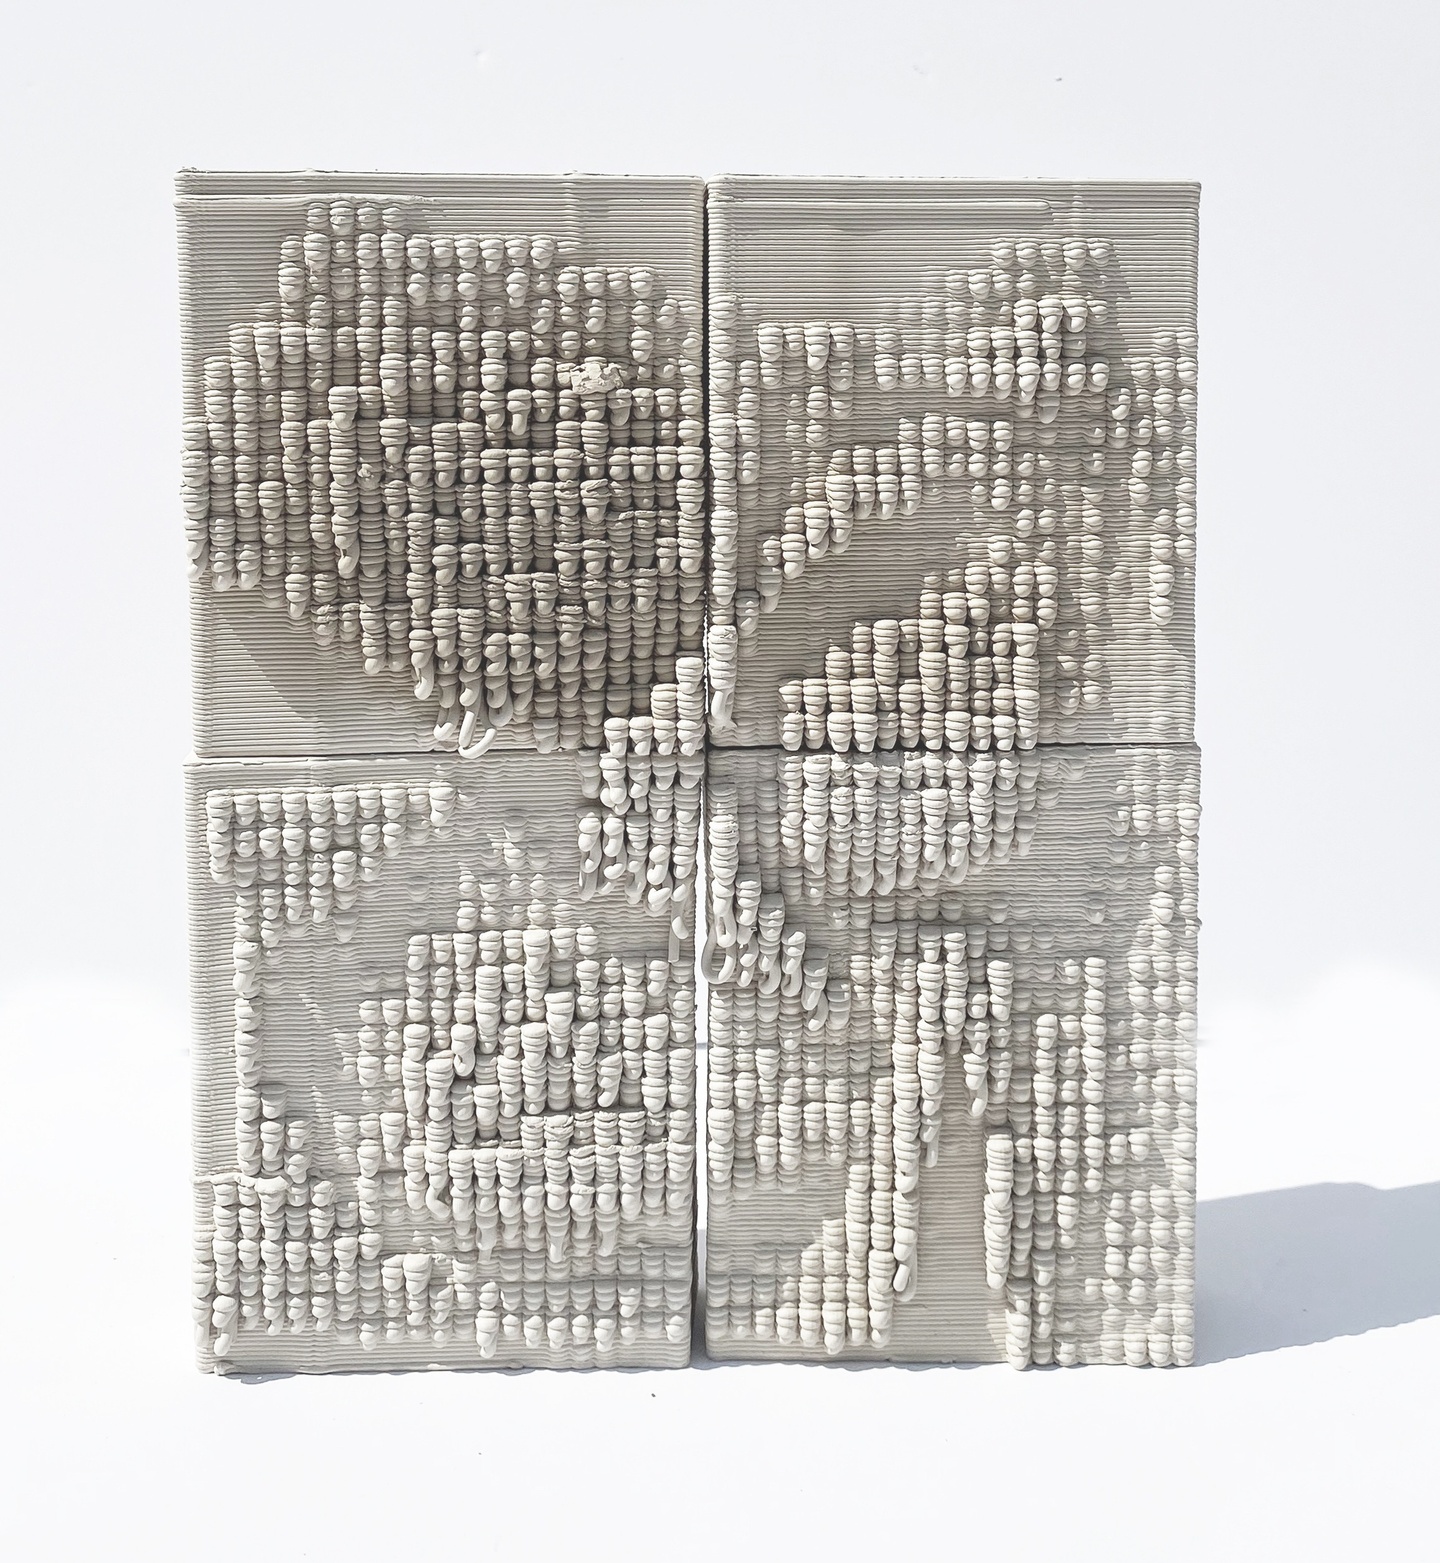 3D-printed white ceramic piece that square in overall shape, with lots of grooved, rounded surfaces protruding.